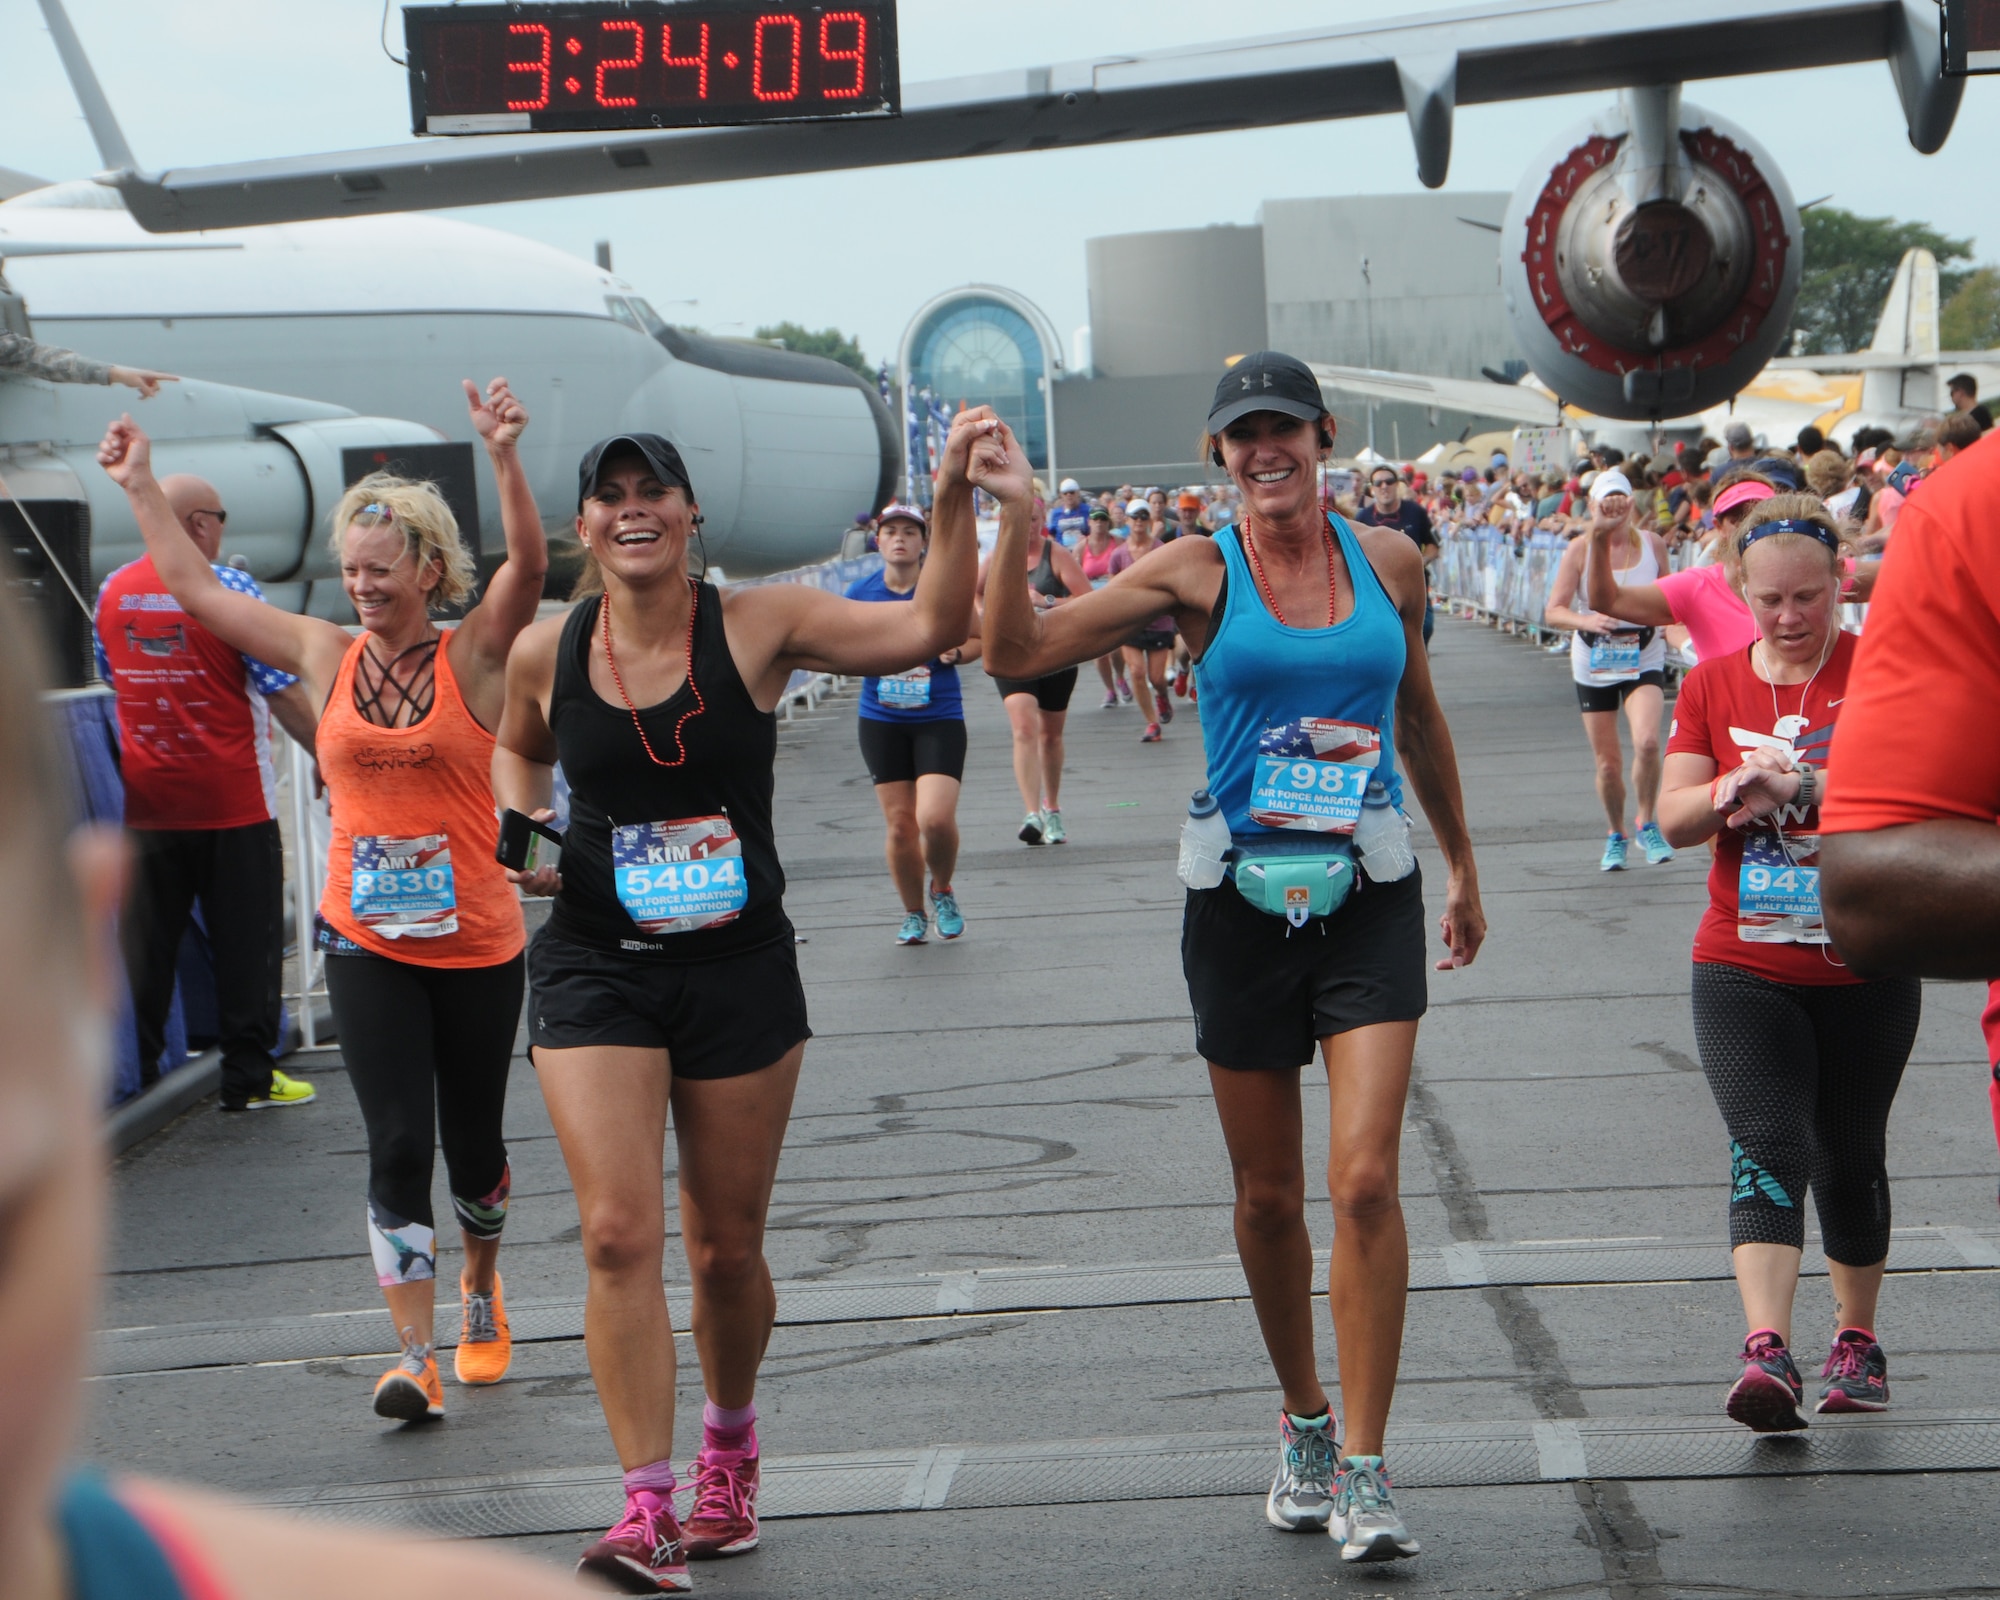 Senior Master Sgt. Kimberly Gunter, center left, and Master Sgt. Kimberly Robertson, center right, both members of the Montana Air National Guard,  hold hands as they cross the finish line at the 20th anniversary U. S. Air Force Marathon at Wright-Patterson Air Force Base, Ohio, Sept. 17, 2016. Gunter, was a first time half-marathon runner participant. (U.S. Air National Guard photo/Staff Sgt. Lindsey Soulsby)